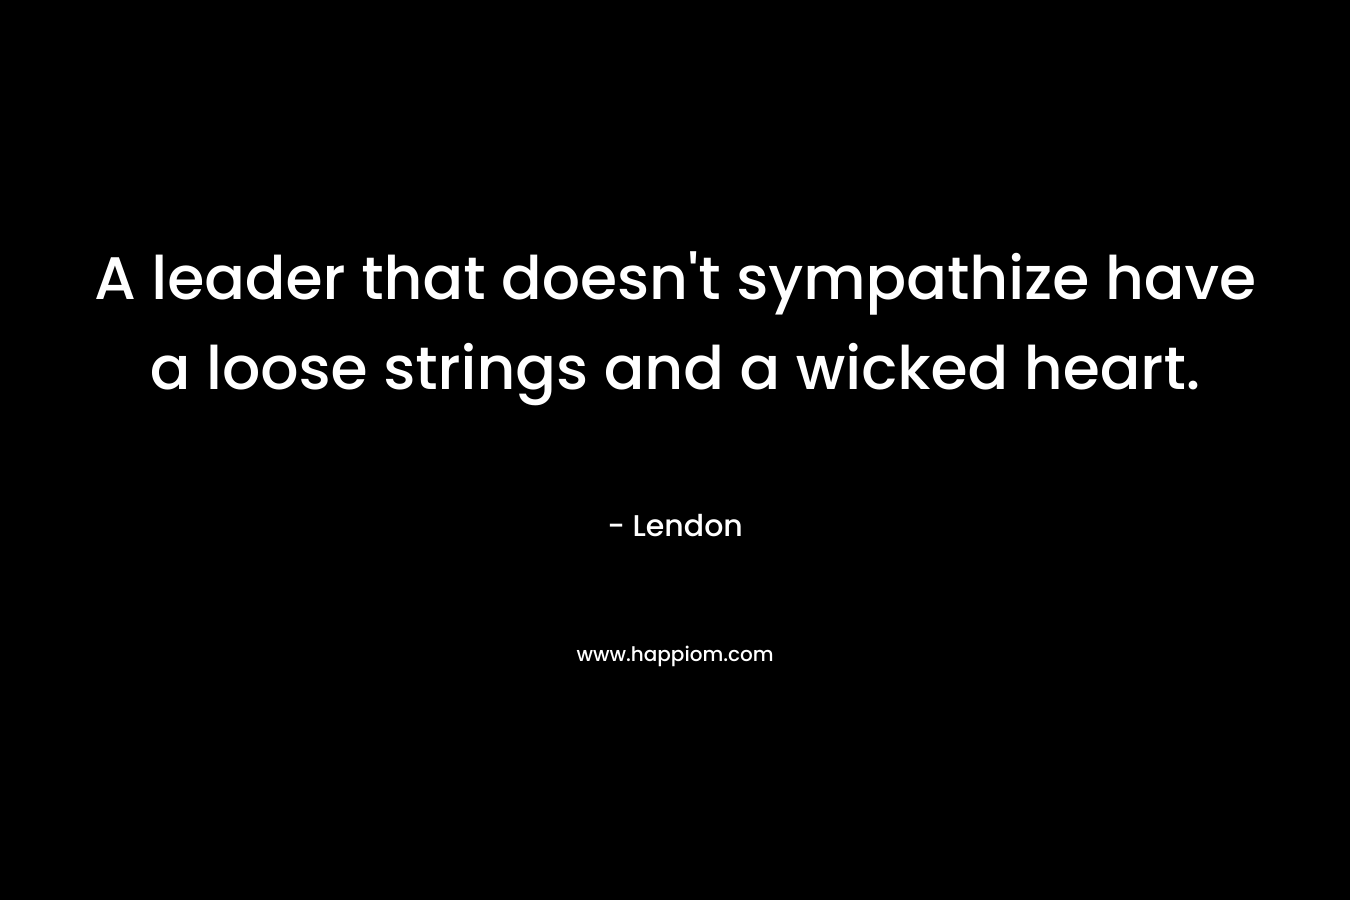 A leader that doesn’t sympathize have a loose strings and a wicked heart. – Lendon